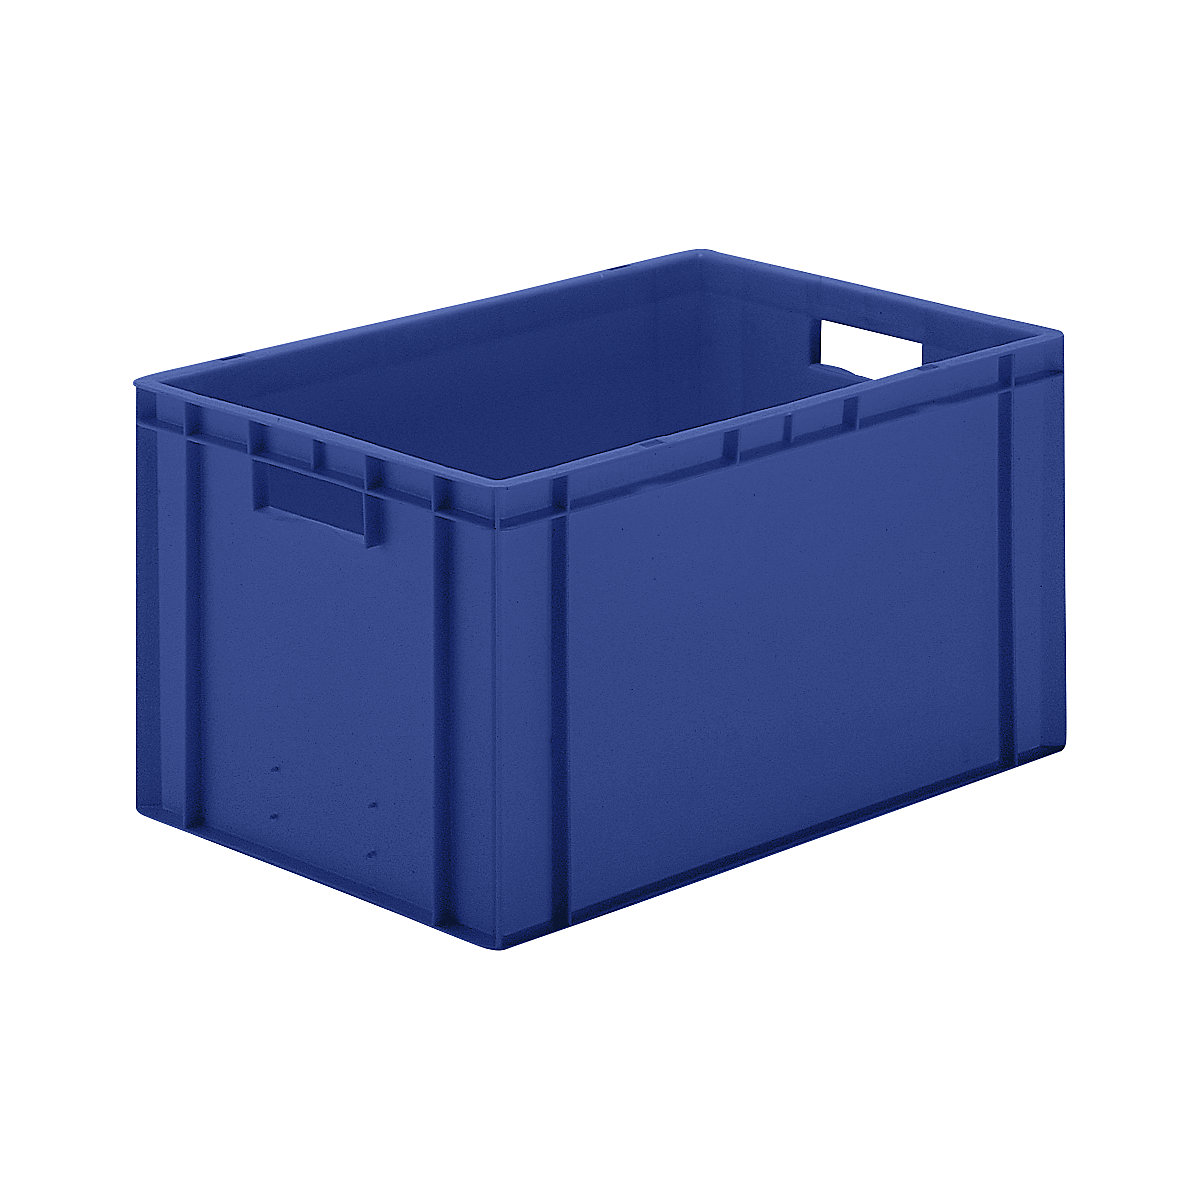 Euro stacking container, closed walls and base, LxWxH 600 x 400 x 320 mm, blue, pack of 5